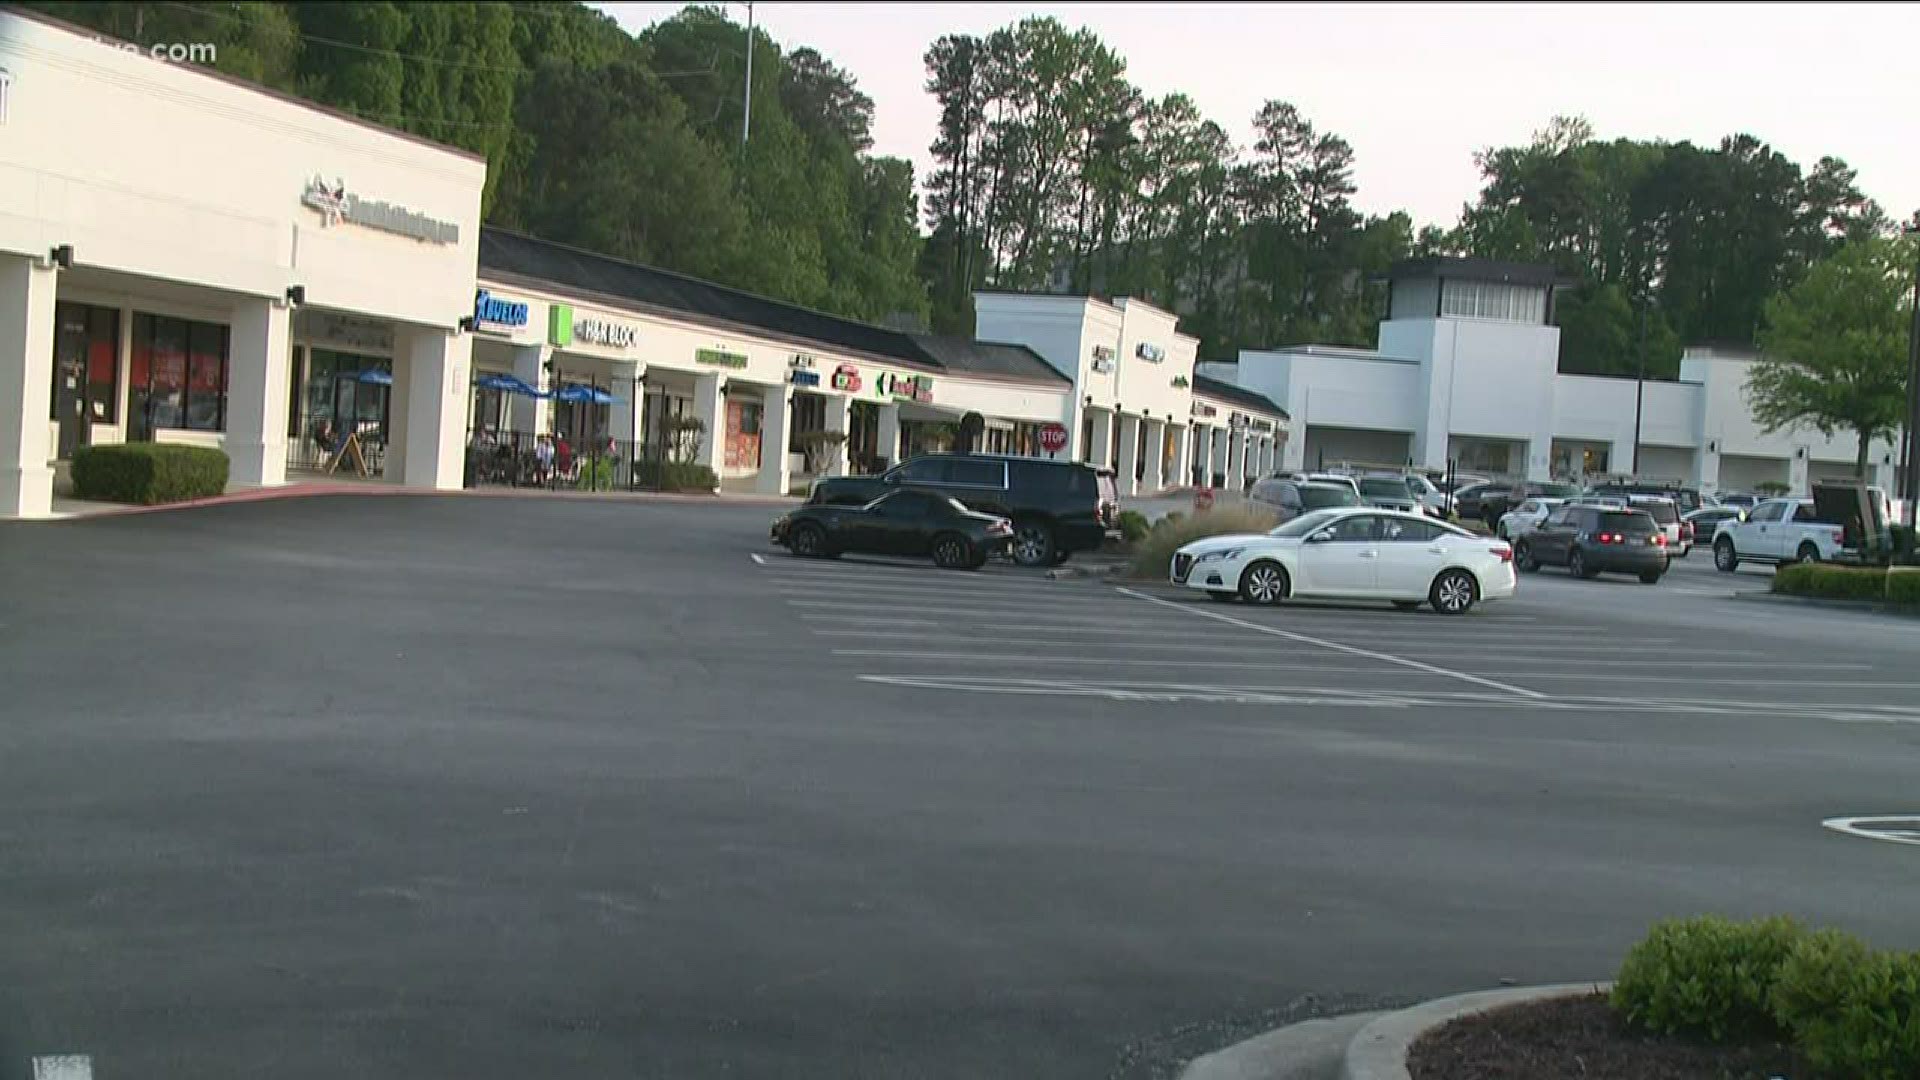 The city of Sandy Springs and five other cities surveyed business owners across north Fulton County, and most of them worry their businesses won't survive.